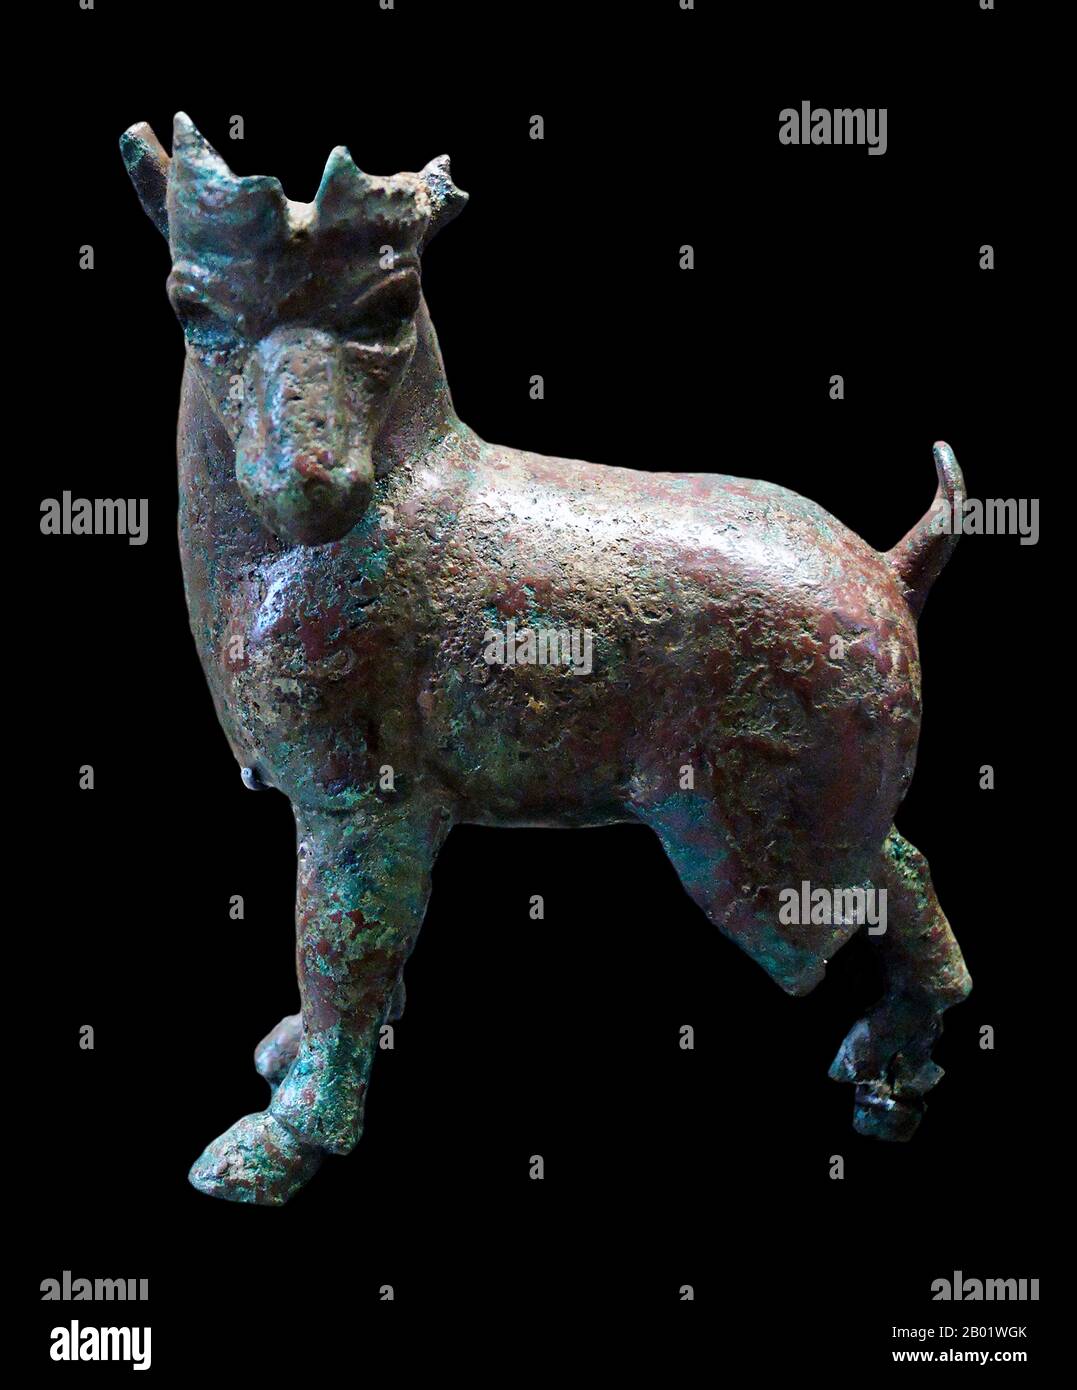 Yemen: Statuette of an ibex. Bronze, 1st century BCE–2nd century CE, Southern Arabia.  South Arabia as a general term refers to several regions as currently recognised, in chief the Republic of Yemen; yet it has historically also included Najran, Jizan, and 'Asir which are presently in Saudi Arabia, and Dhofar presently in Oman. The frontiers of South Arabia as linguistically conceived would include the historic peoples speaking the related South Arabian languages as well as neighboring dialects of Arabic, and their descendants. Stock Photo